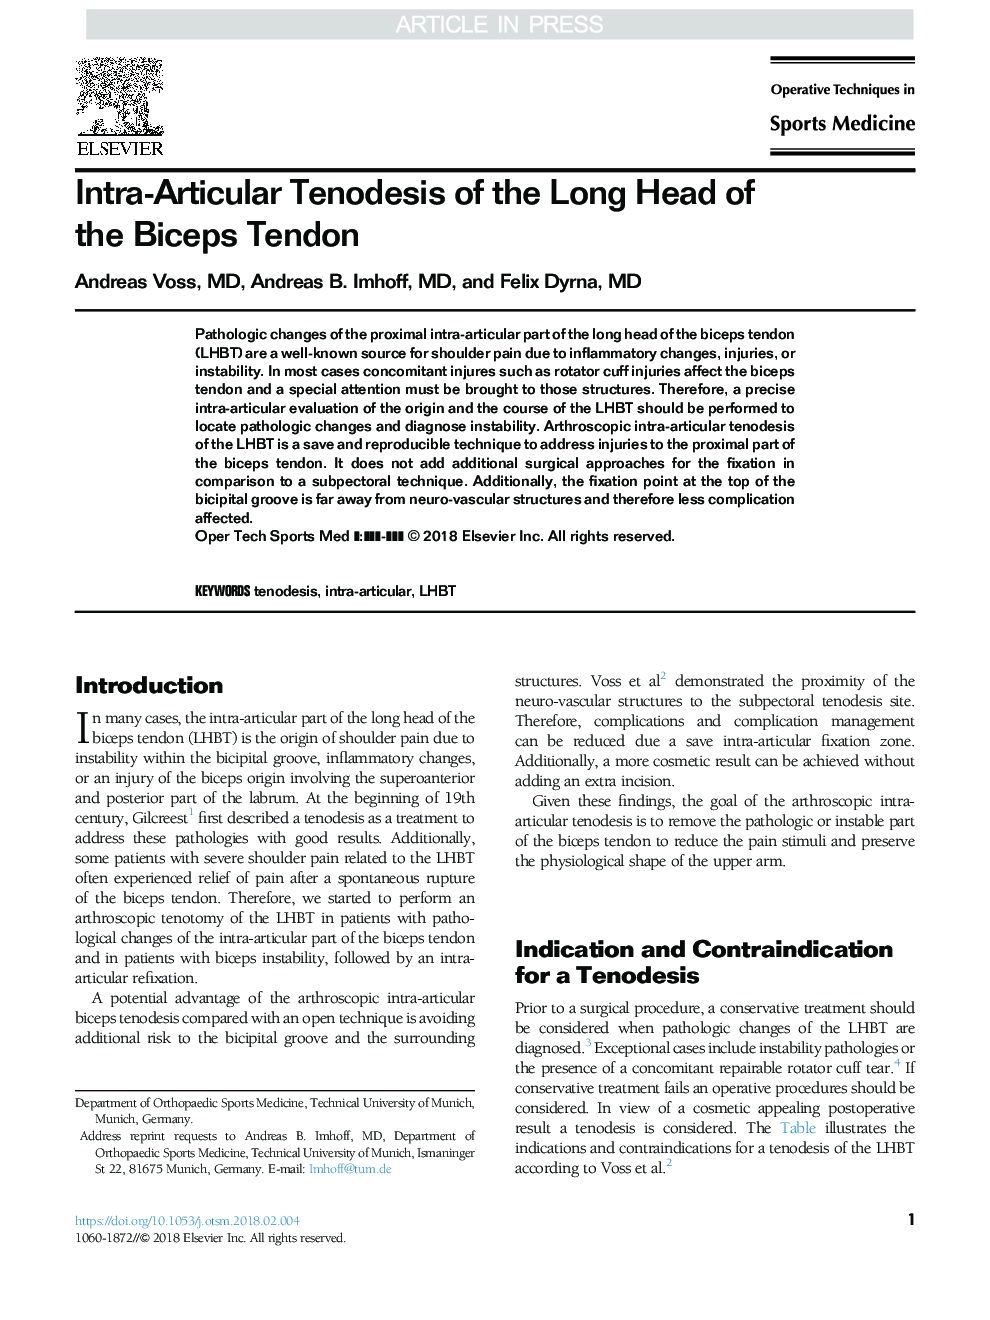 Intra-Articular Tenodesis of the Long Head of the Biceps Tendon